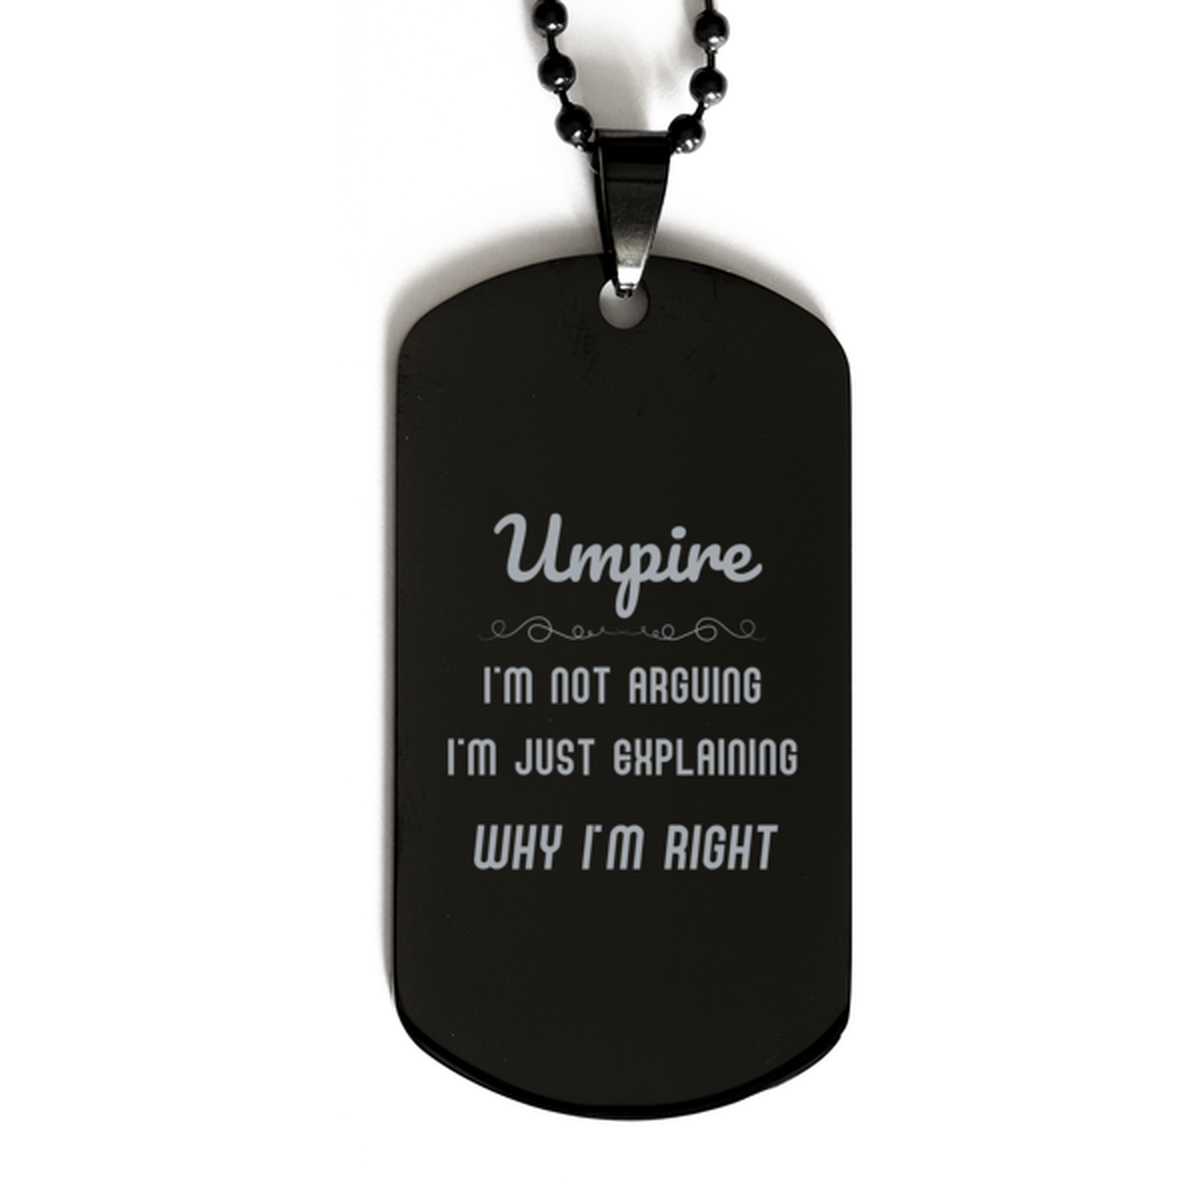 Umpire I'm not Arguing. I'm Just Explaining Why I'm RIGHT Black Dog Tag, Funny Saying Quote Umpire Gifts For Umpire Graduation Birthday Christmas Gifts for Men Women Coworker